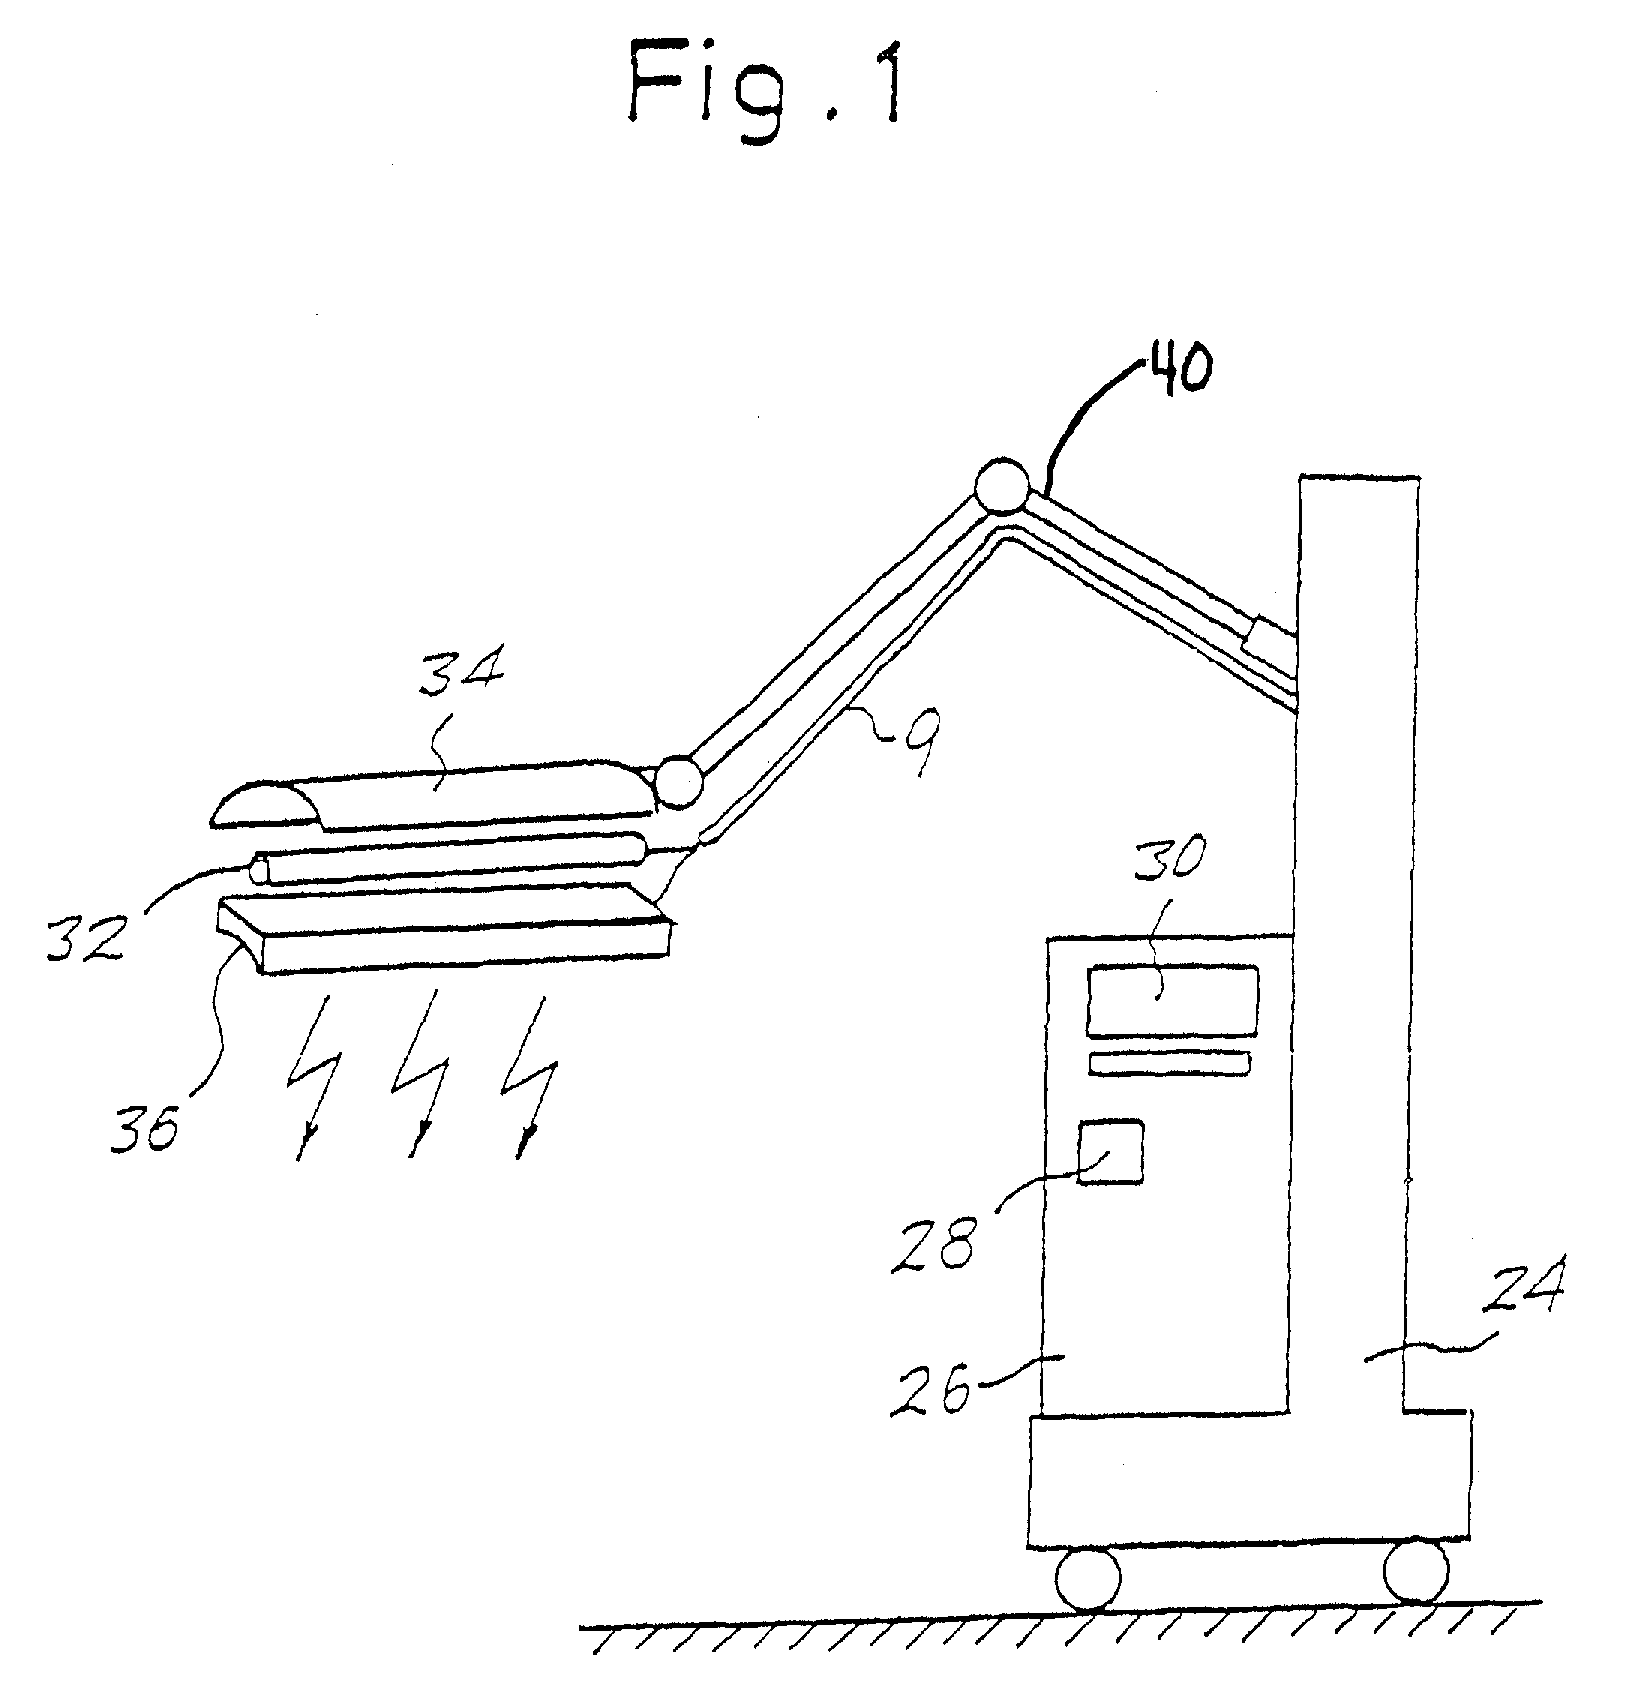 Apparatus with ultra violet spectrum lamp, for the treatment of psoriasis